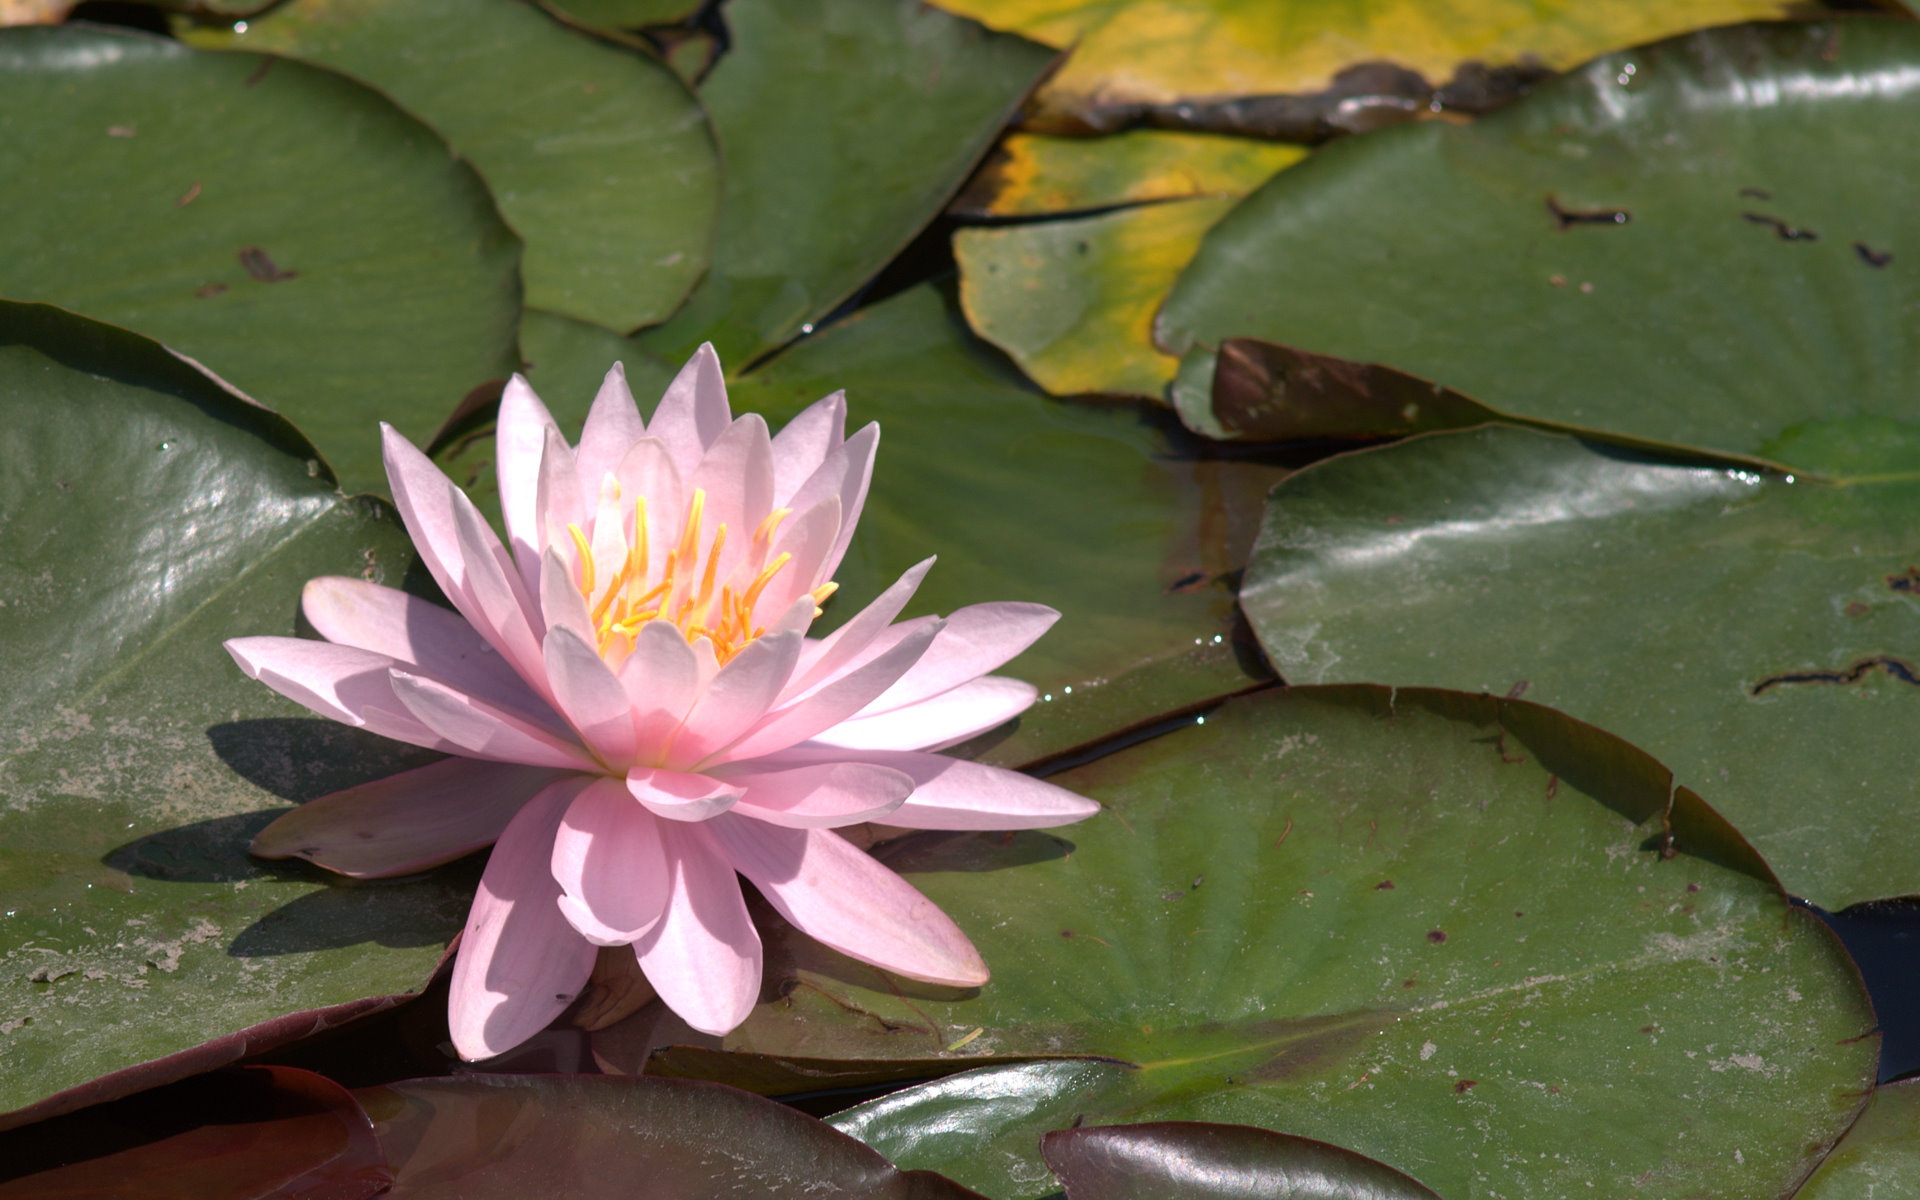 Water Lily Wallpaper